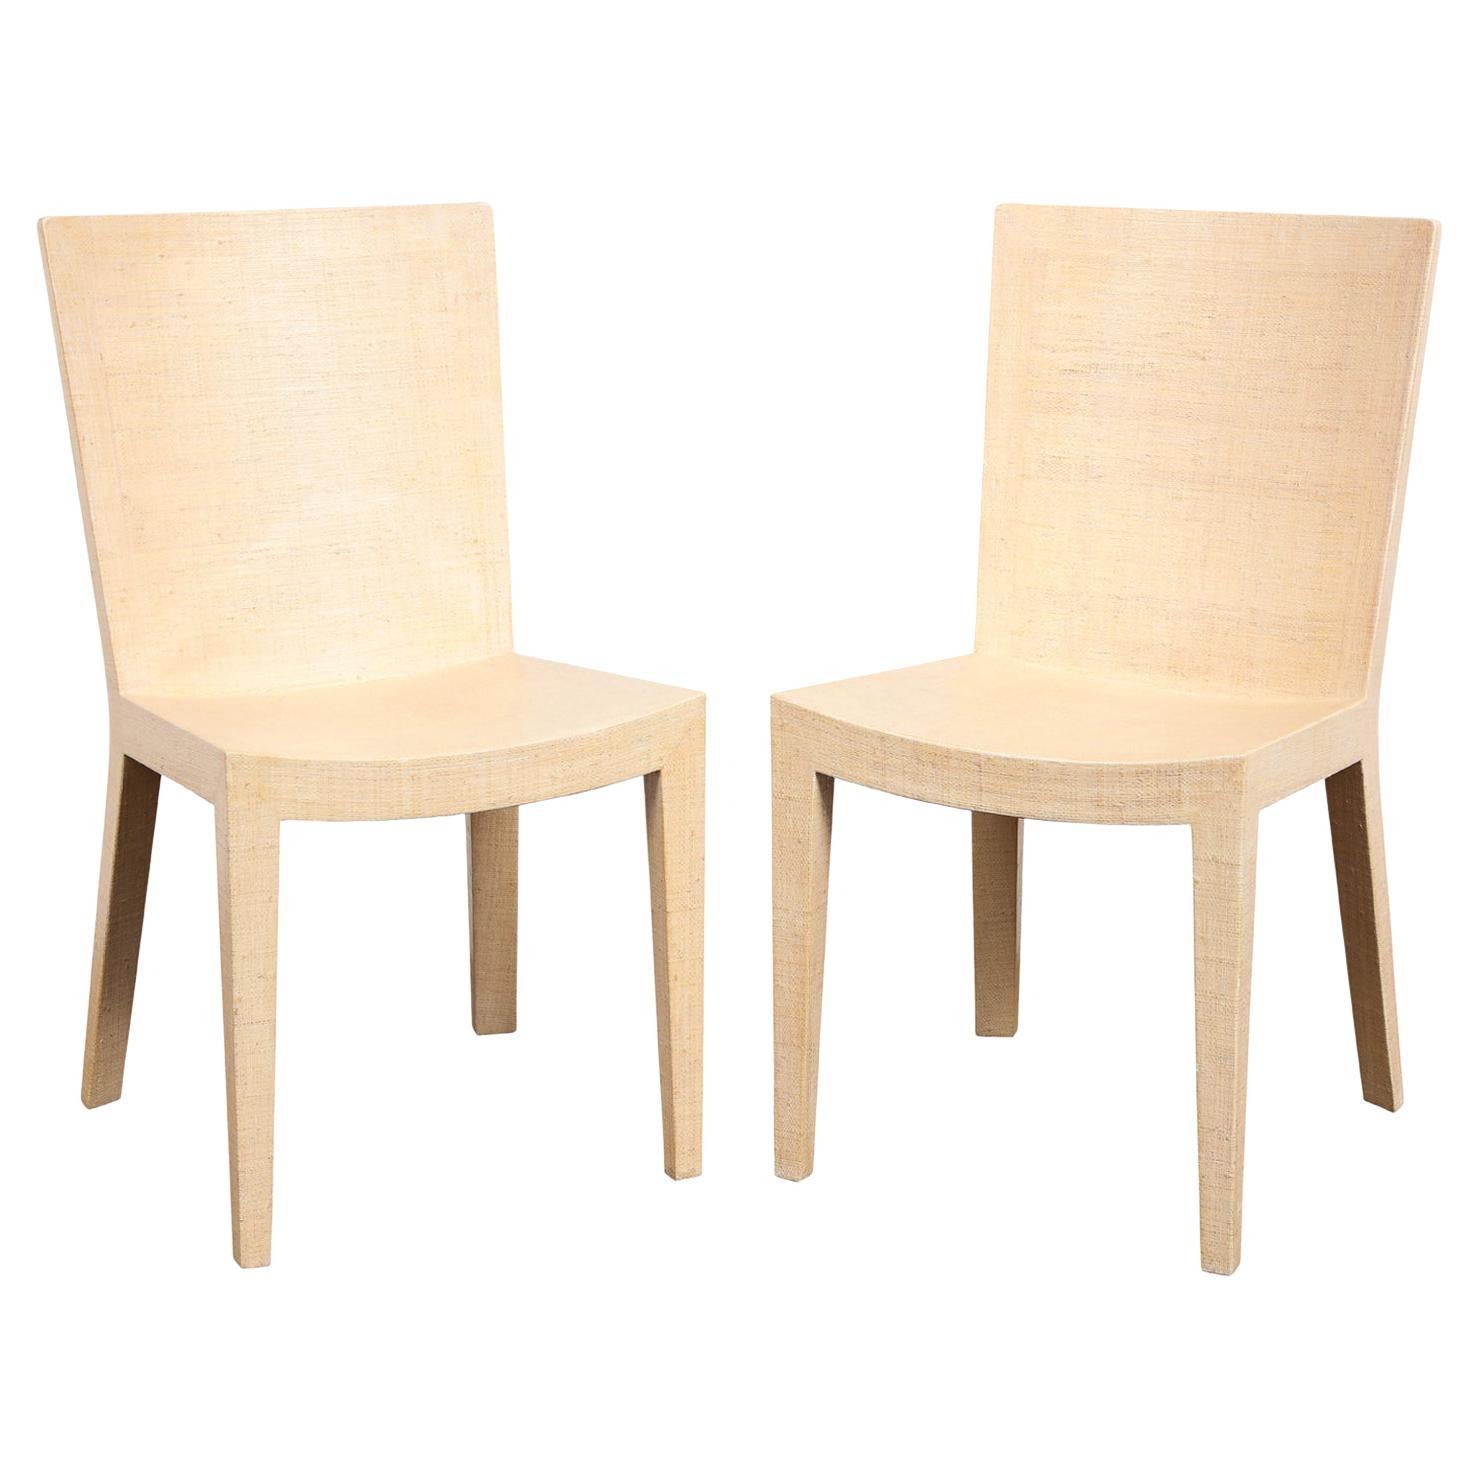 Karl Springer Pair of "JMF Chairs" in Lacquered Raffia 1993 'Signed'